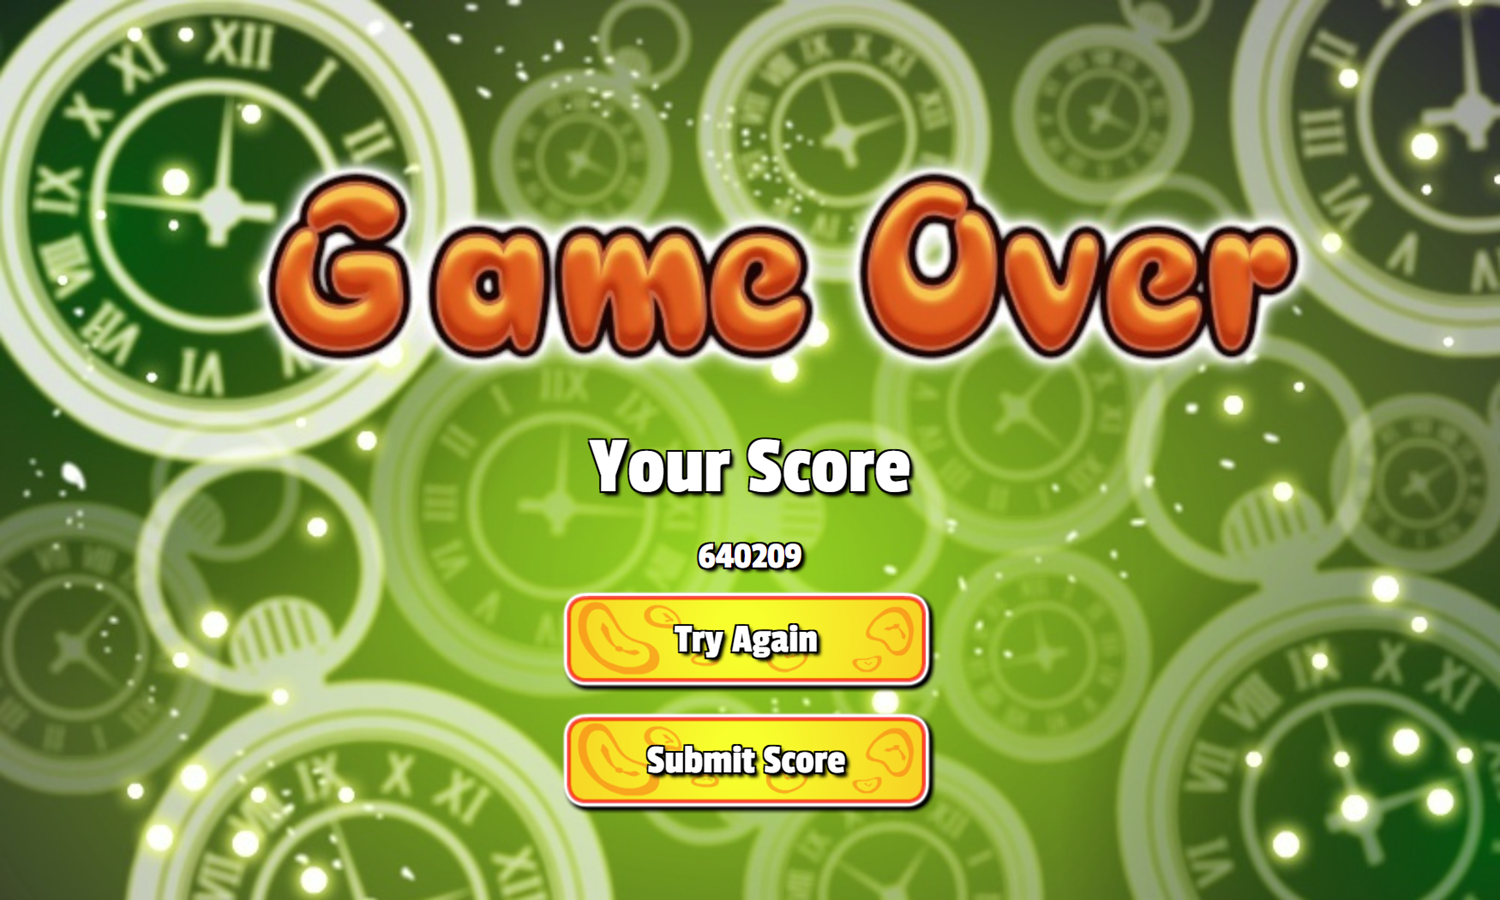 Time Connect Game Over Screen Screenshot.